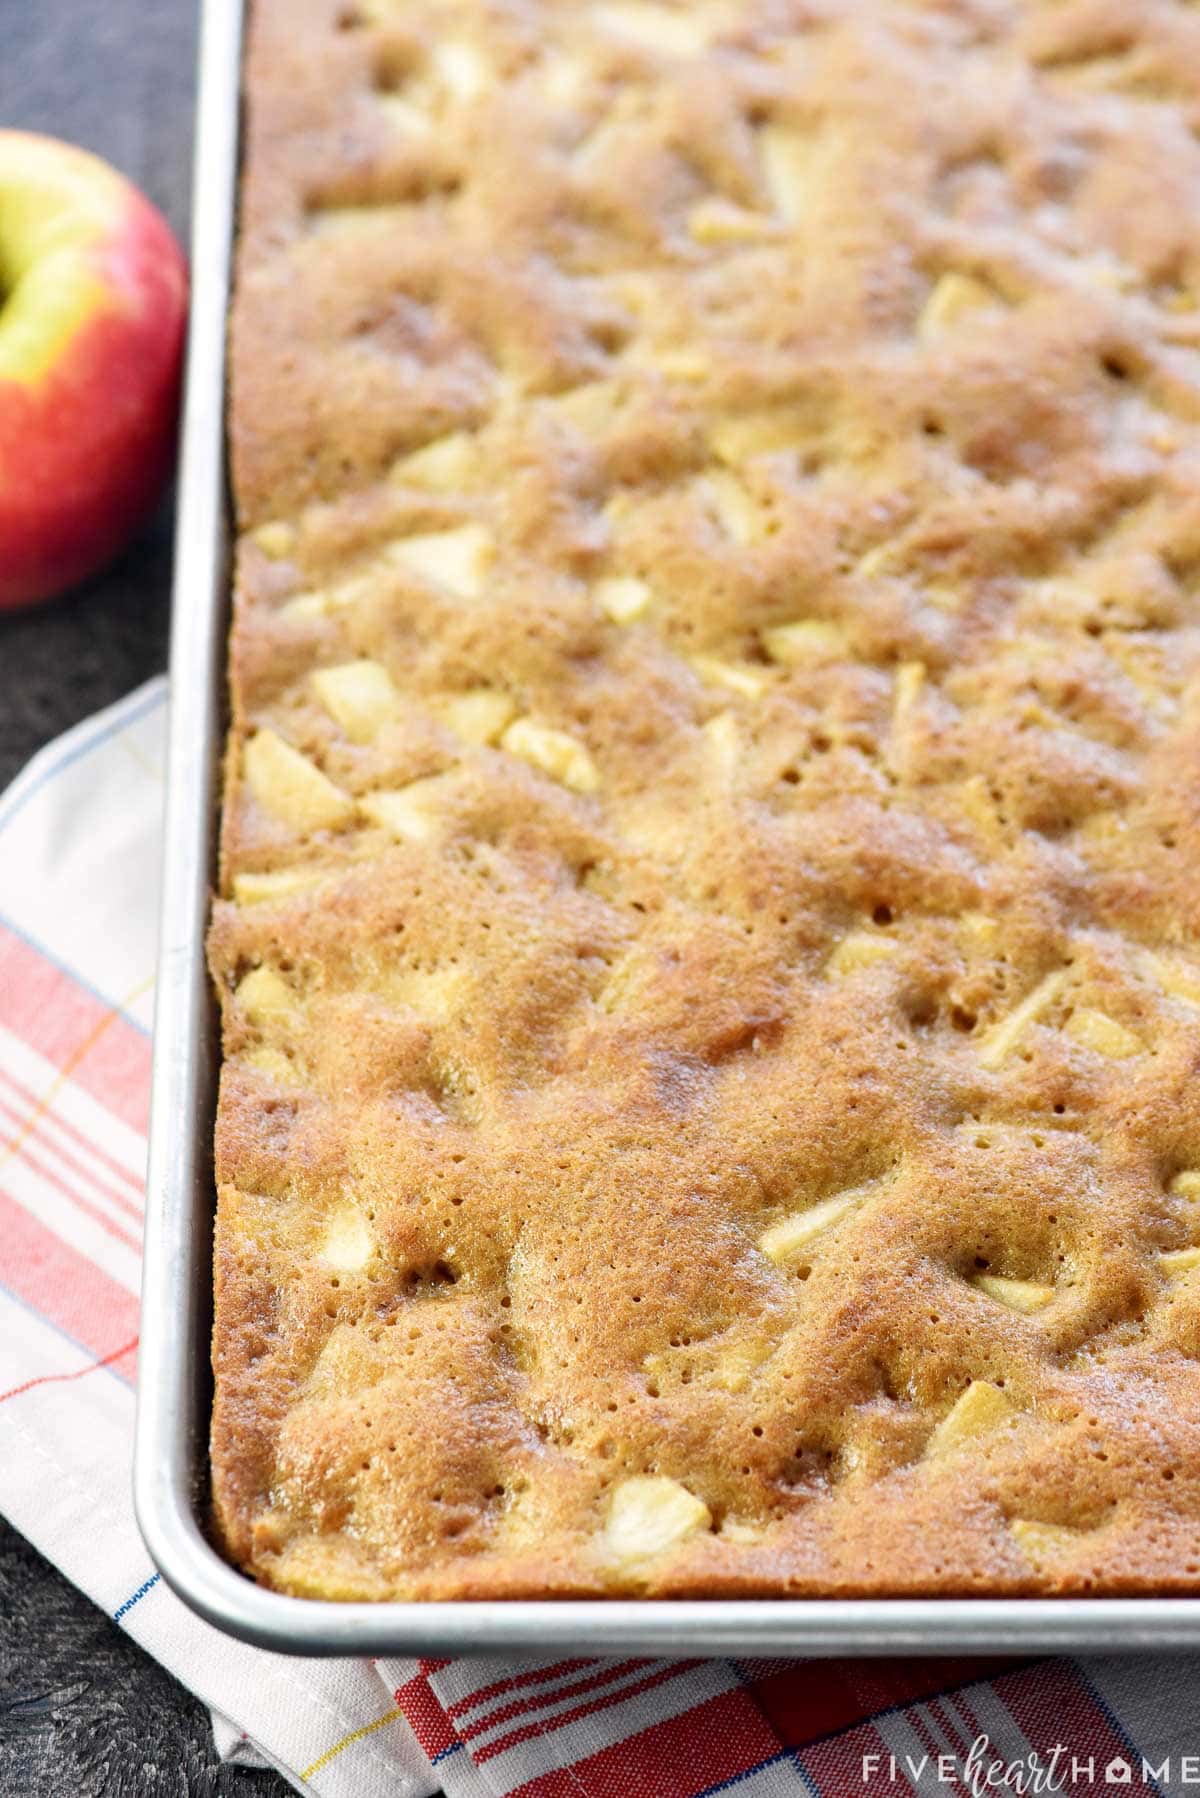 Caramel Apple Cake recipe fresh out of oven.